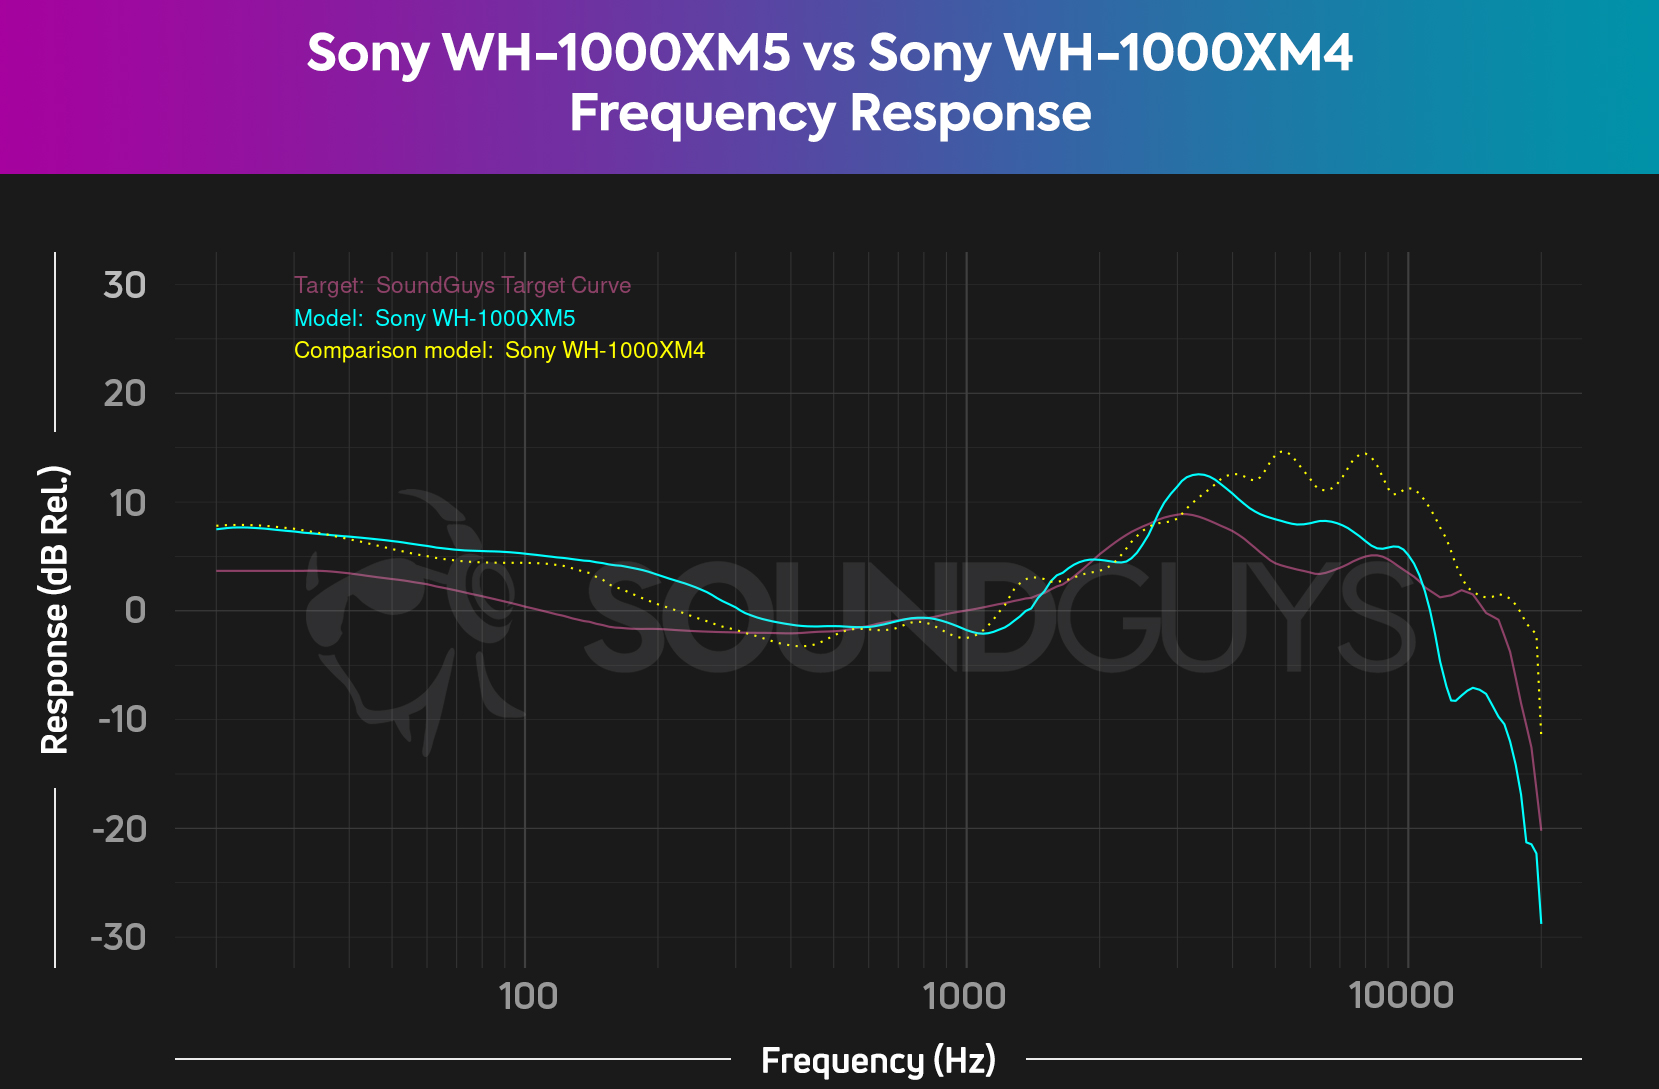 The Sony WH-1000XM4 has far more emphasized highs than the WH-1000XM5.